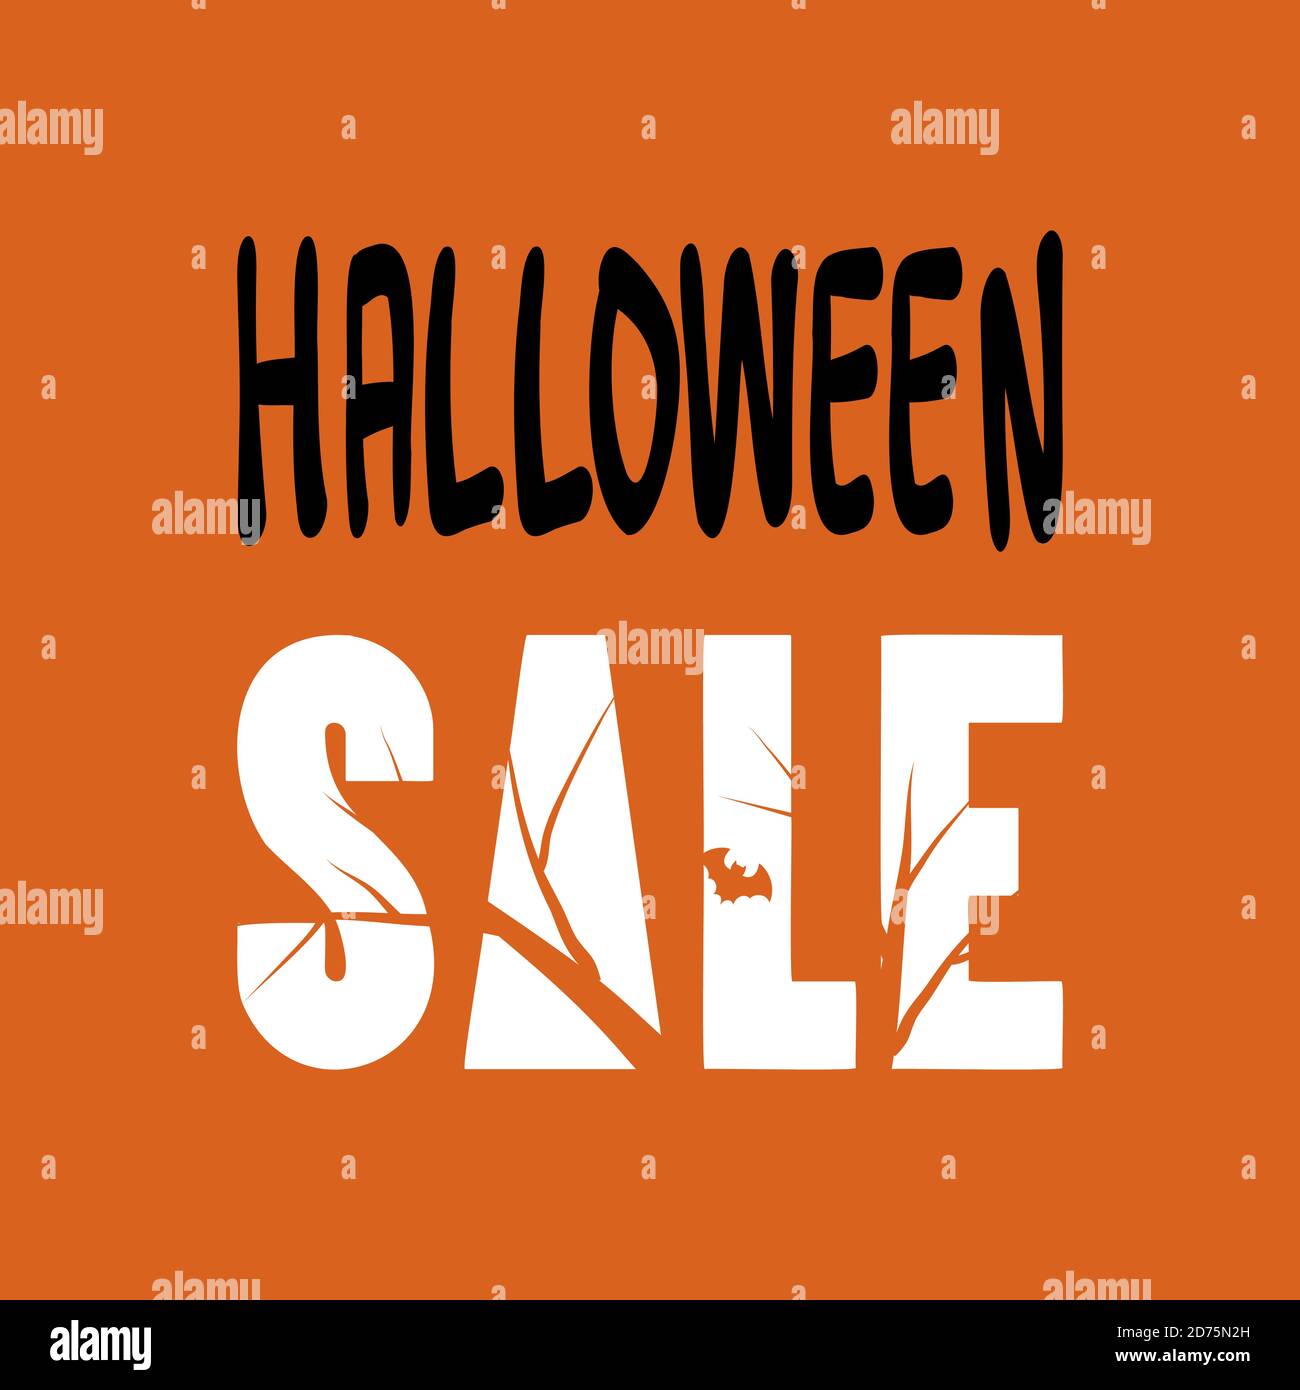 Halloween Sale special offer banner template with hand drawn lettering for holiday shopping. Limited time only. Vector illustration. Happy halloween. Stock Vector